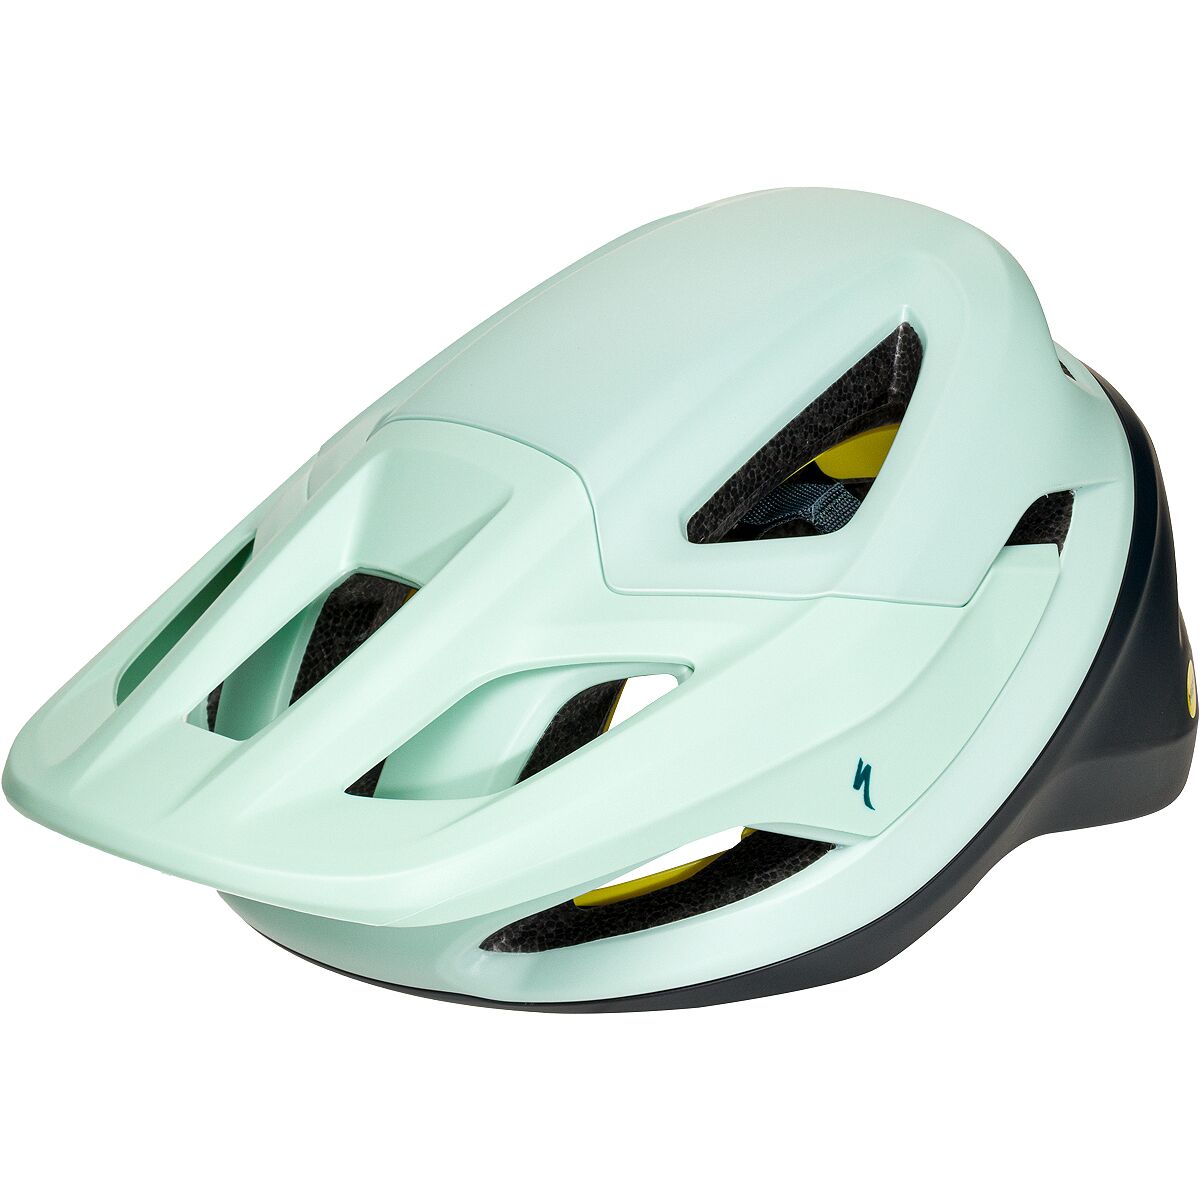 Specialized Camber Helmet White Sage/Deep Lake Metal, XS